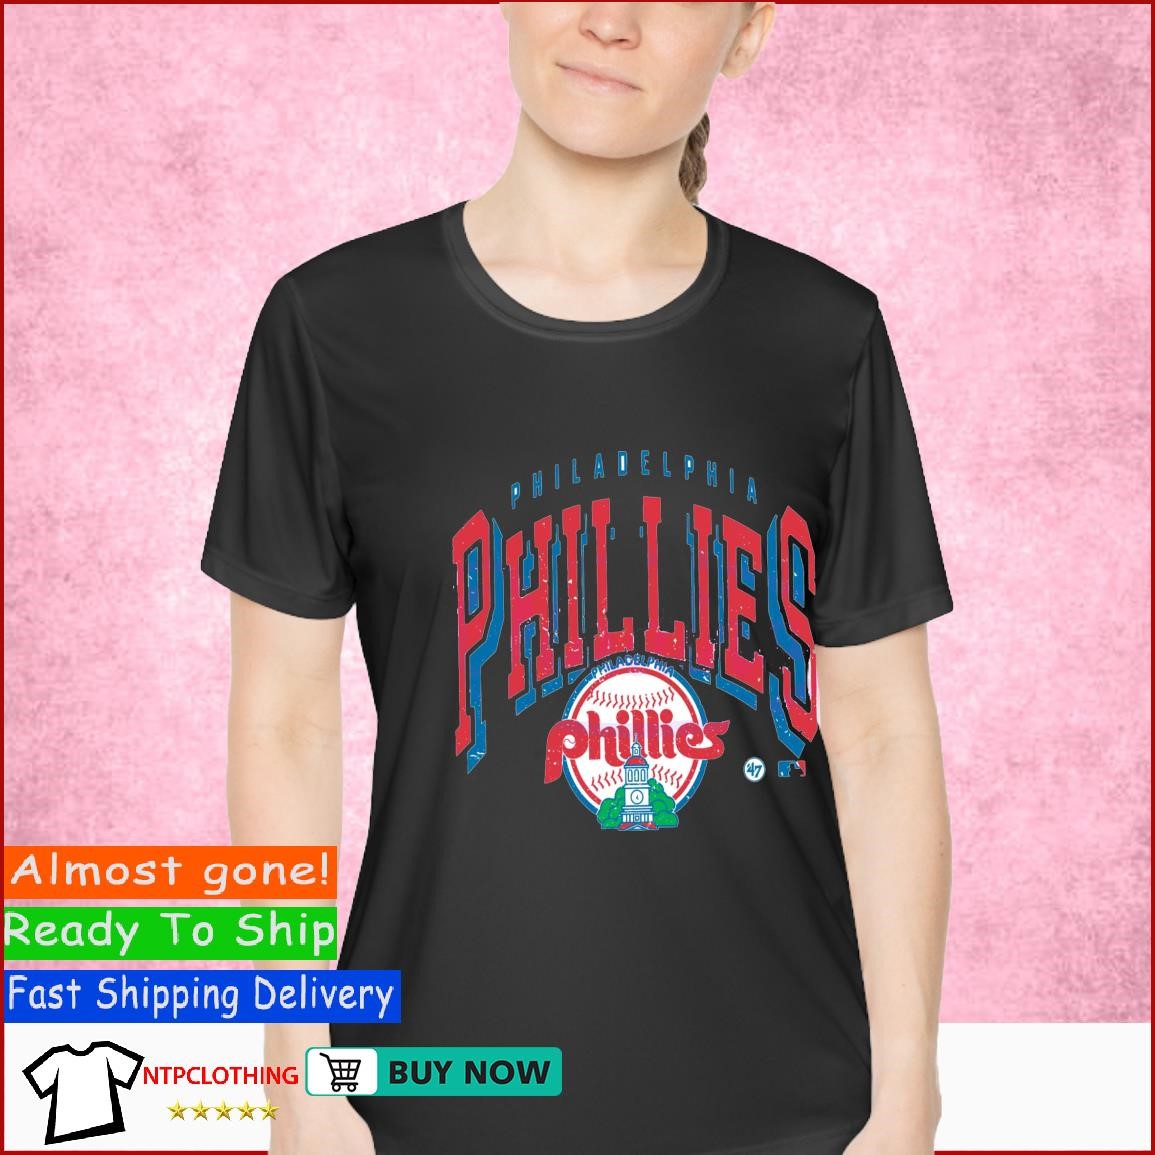 phillies shirts for sale